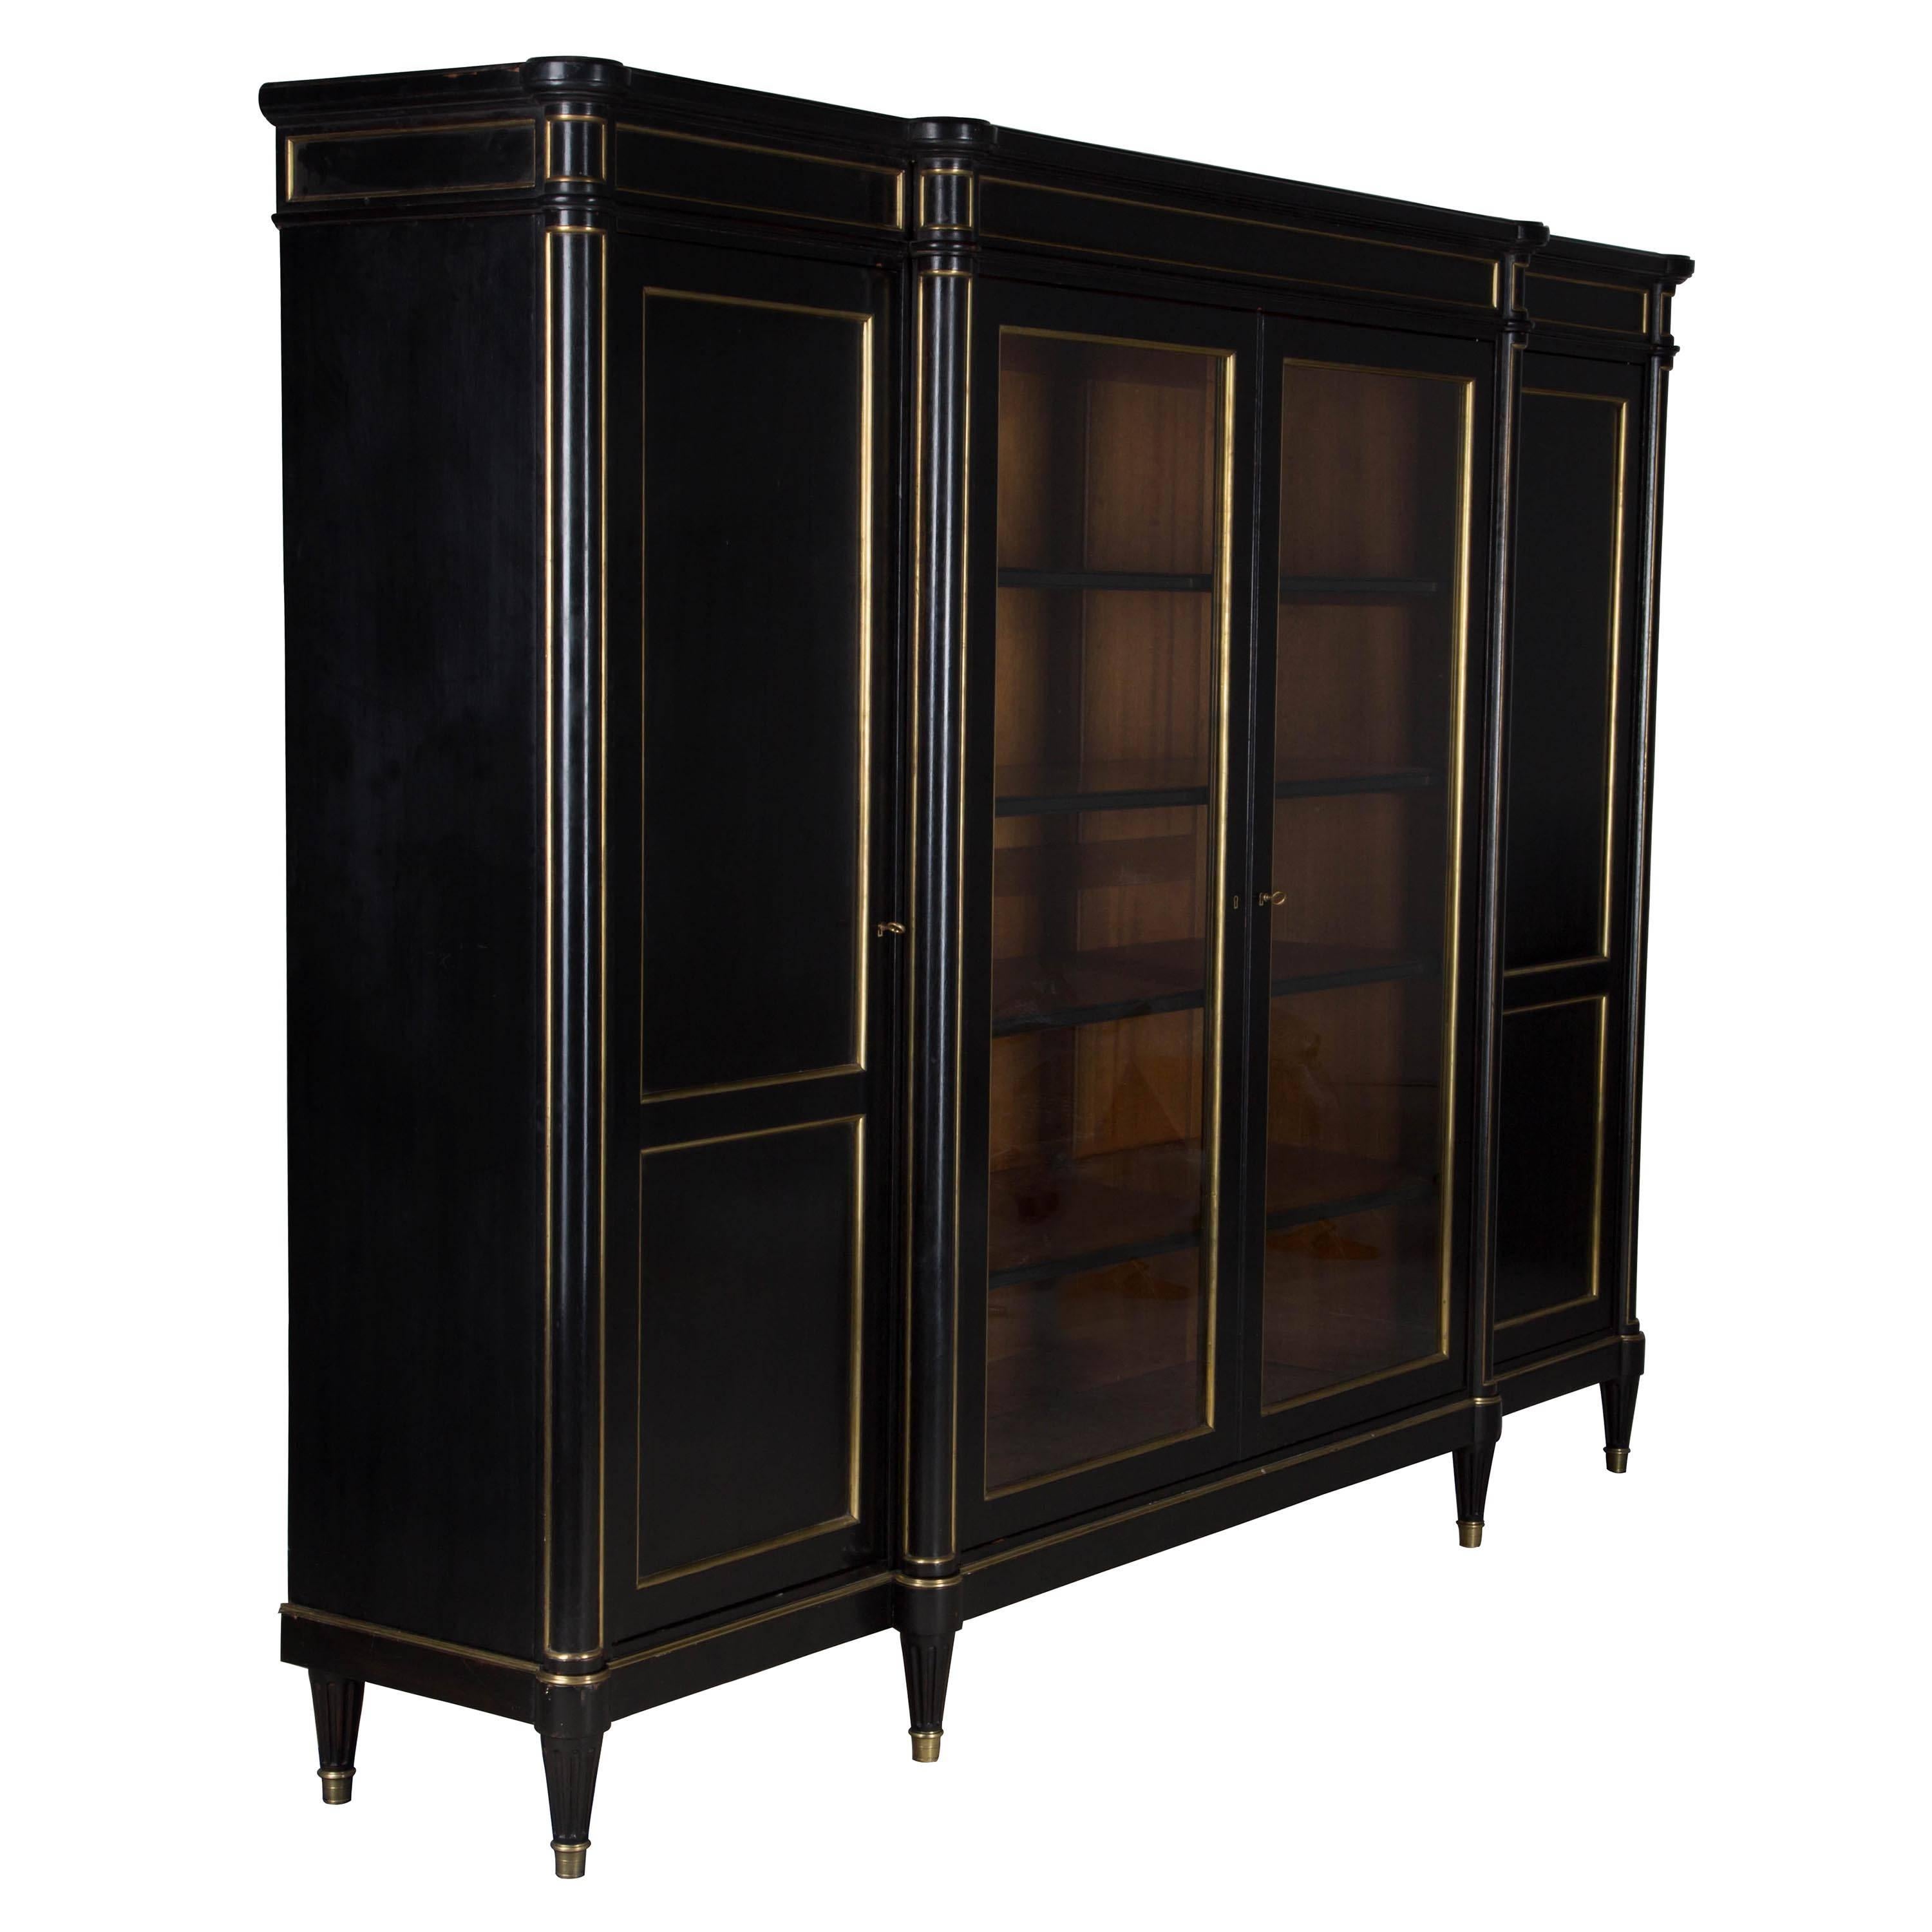 A wonderfully chic 1920s French ebonised mahogany 4-door bookcase with brass mounts.